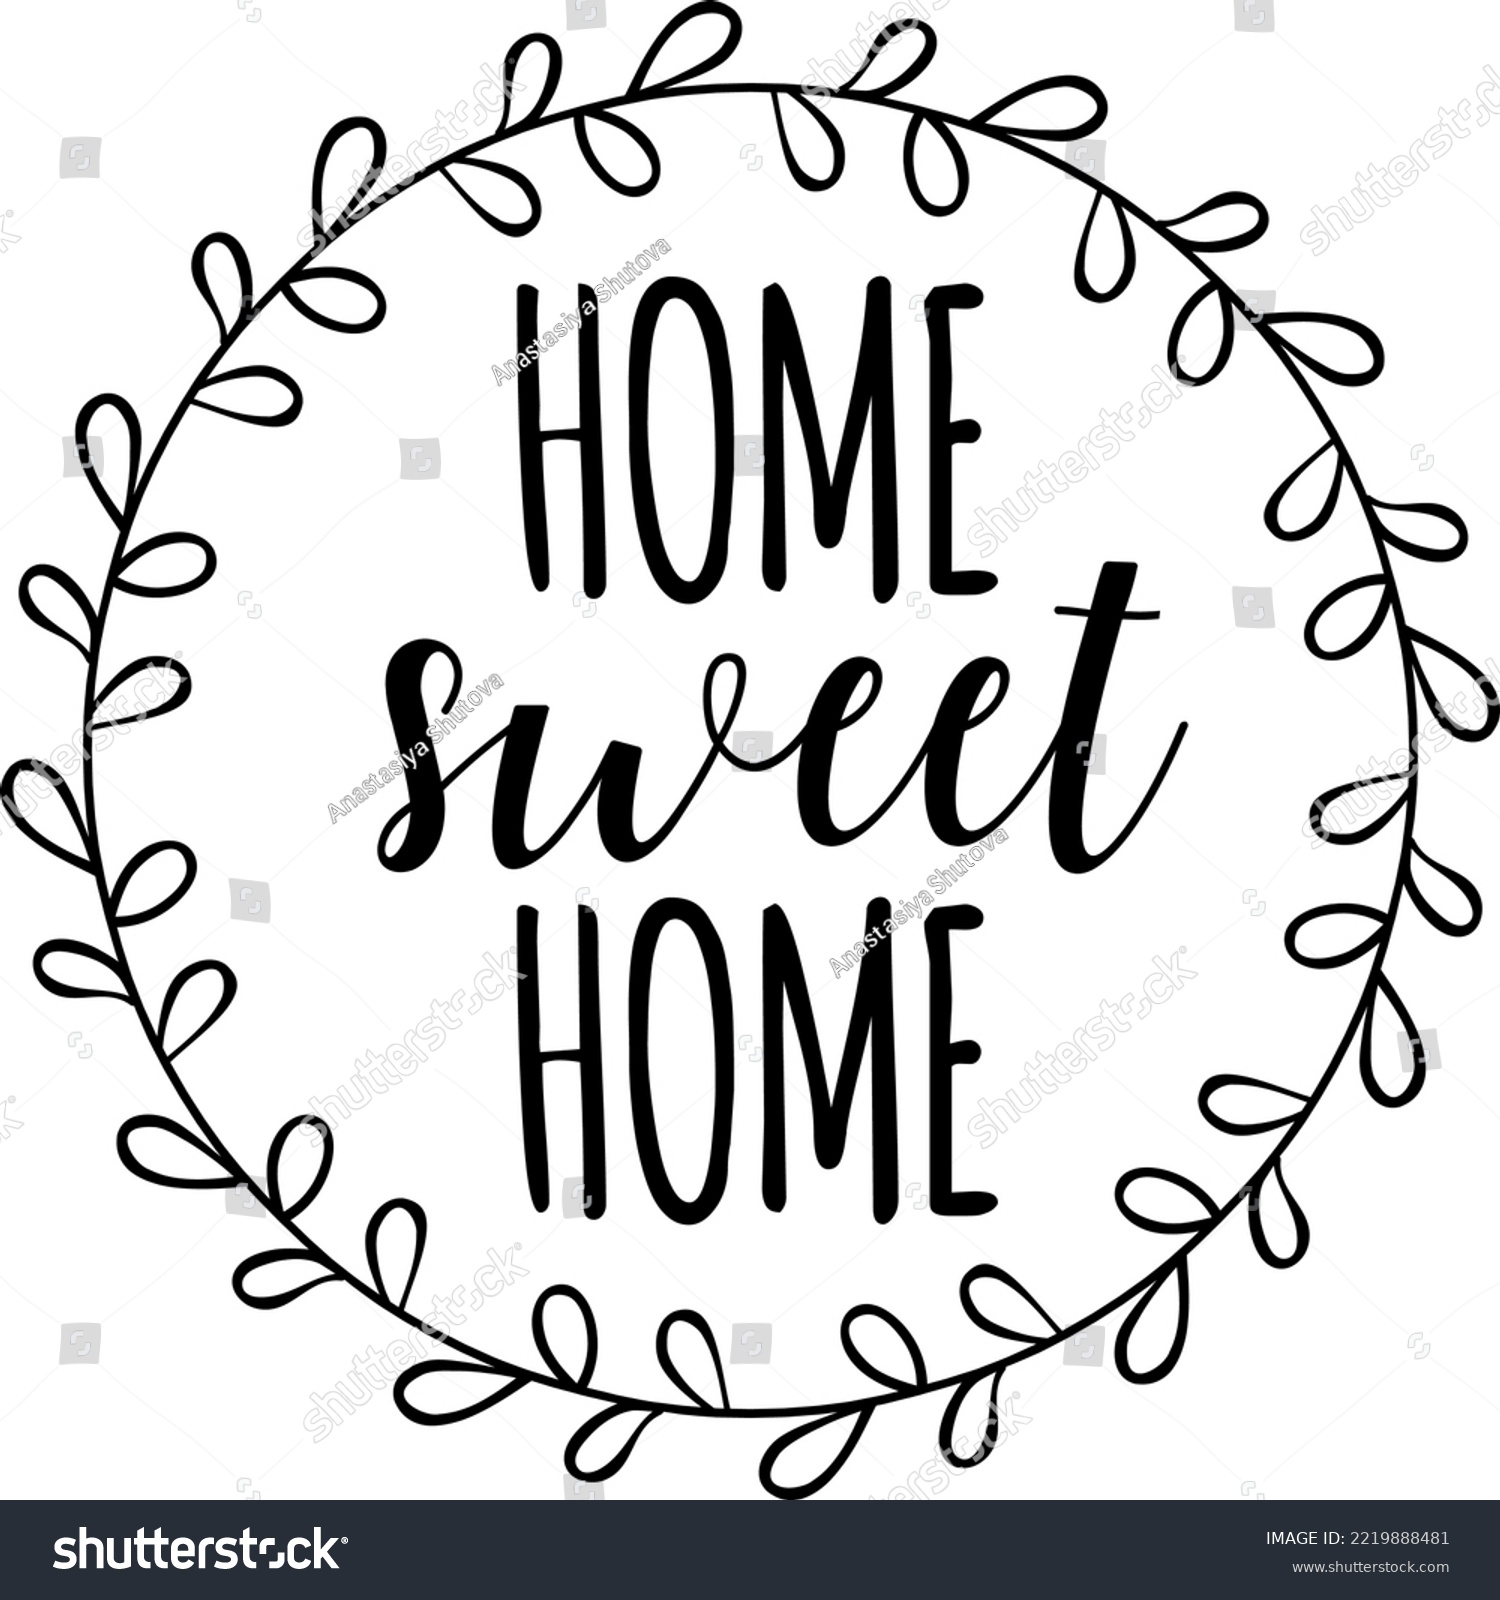 SVG of Home sweet home Svg cut file. Home round sign vector illustration isolated on white background svg